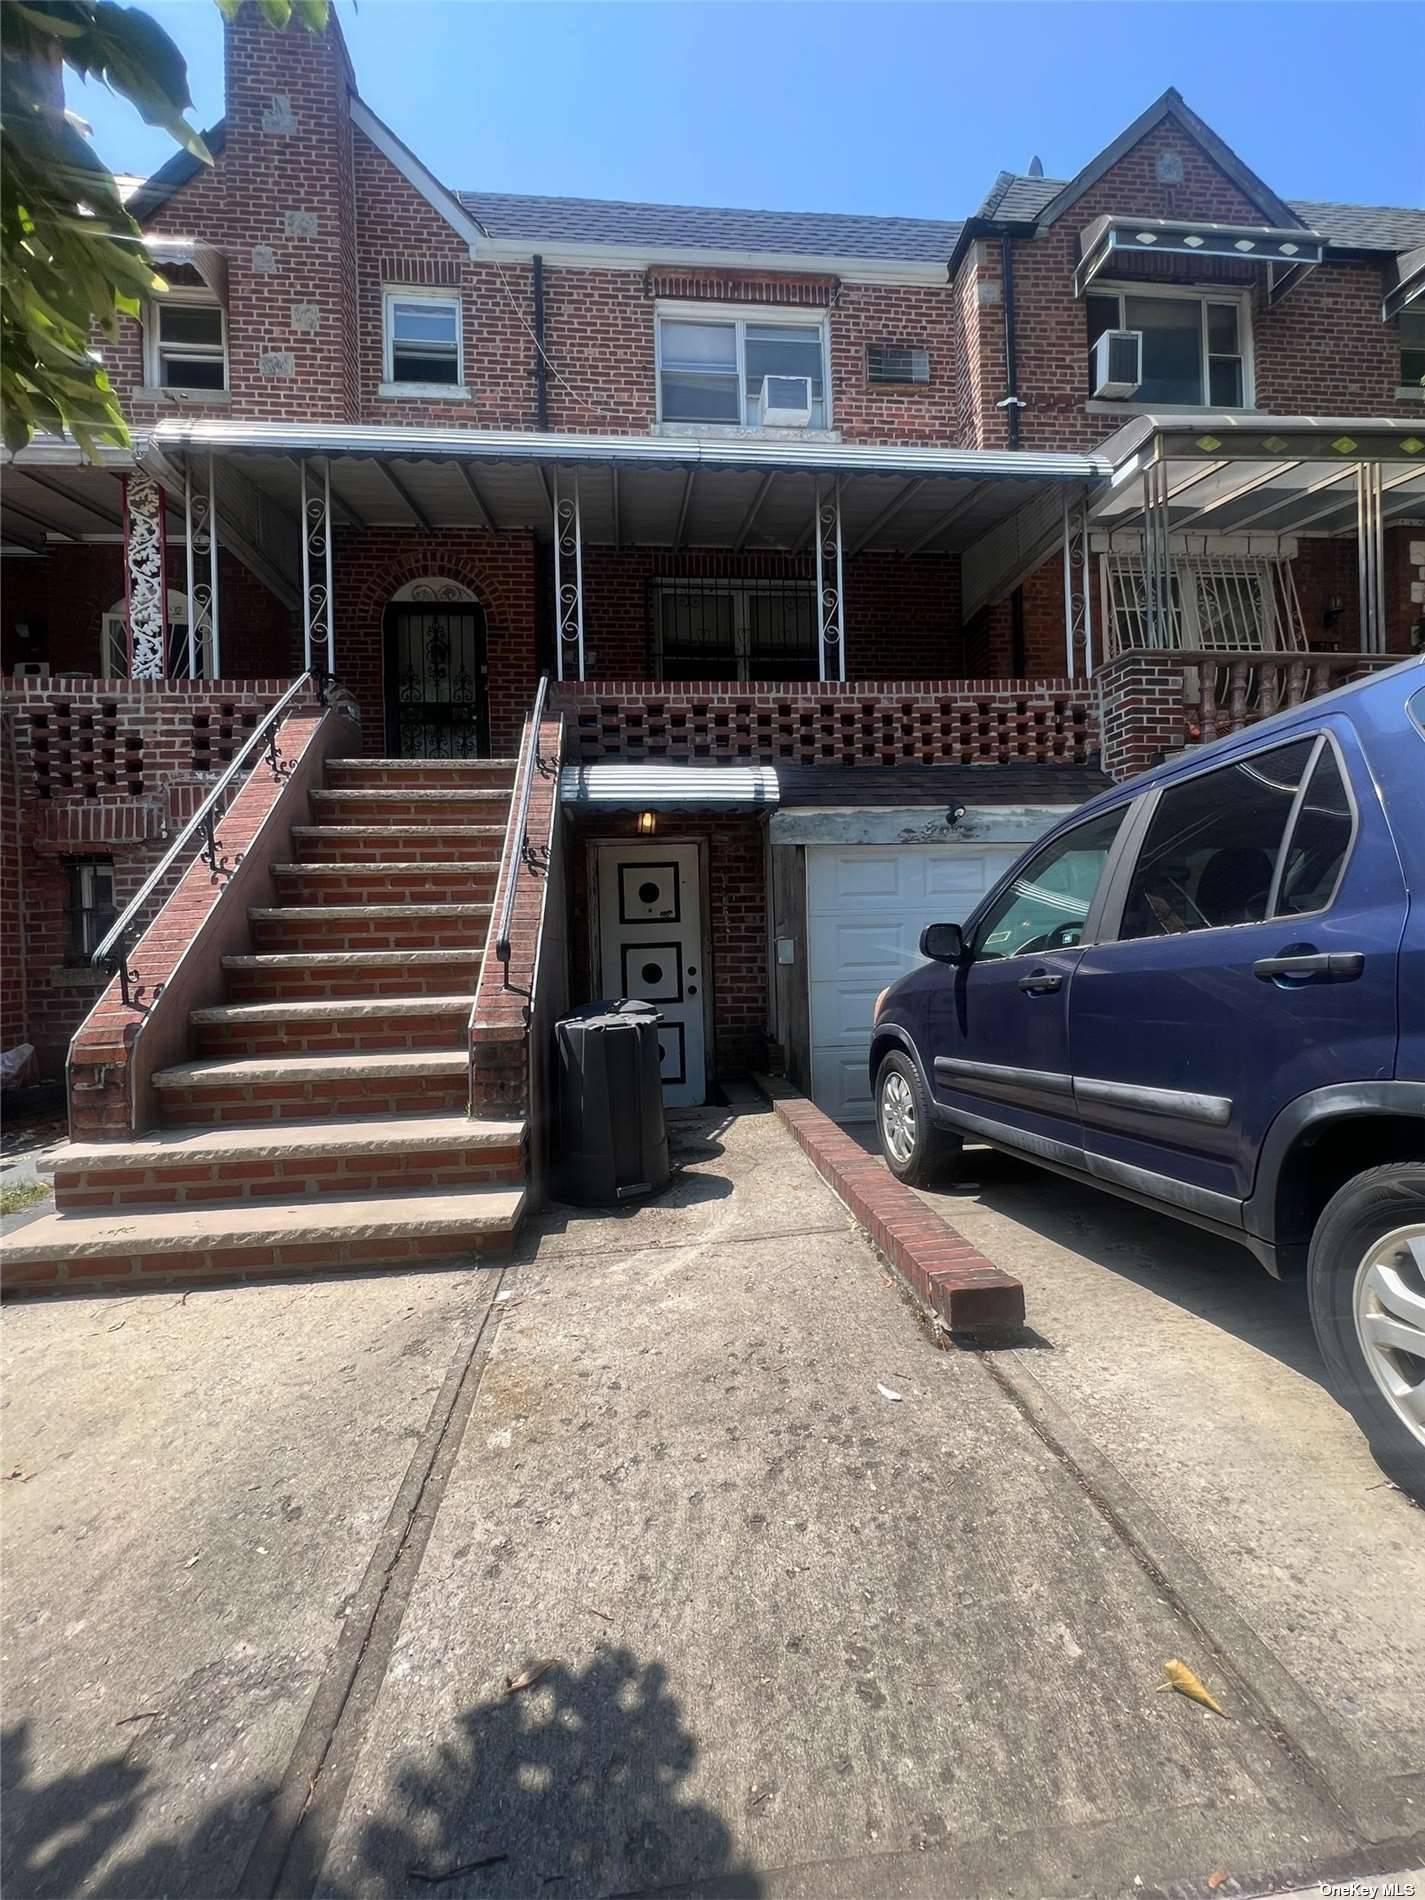 Welcome home to this 2 family brick house in the heart of East Flatbush.